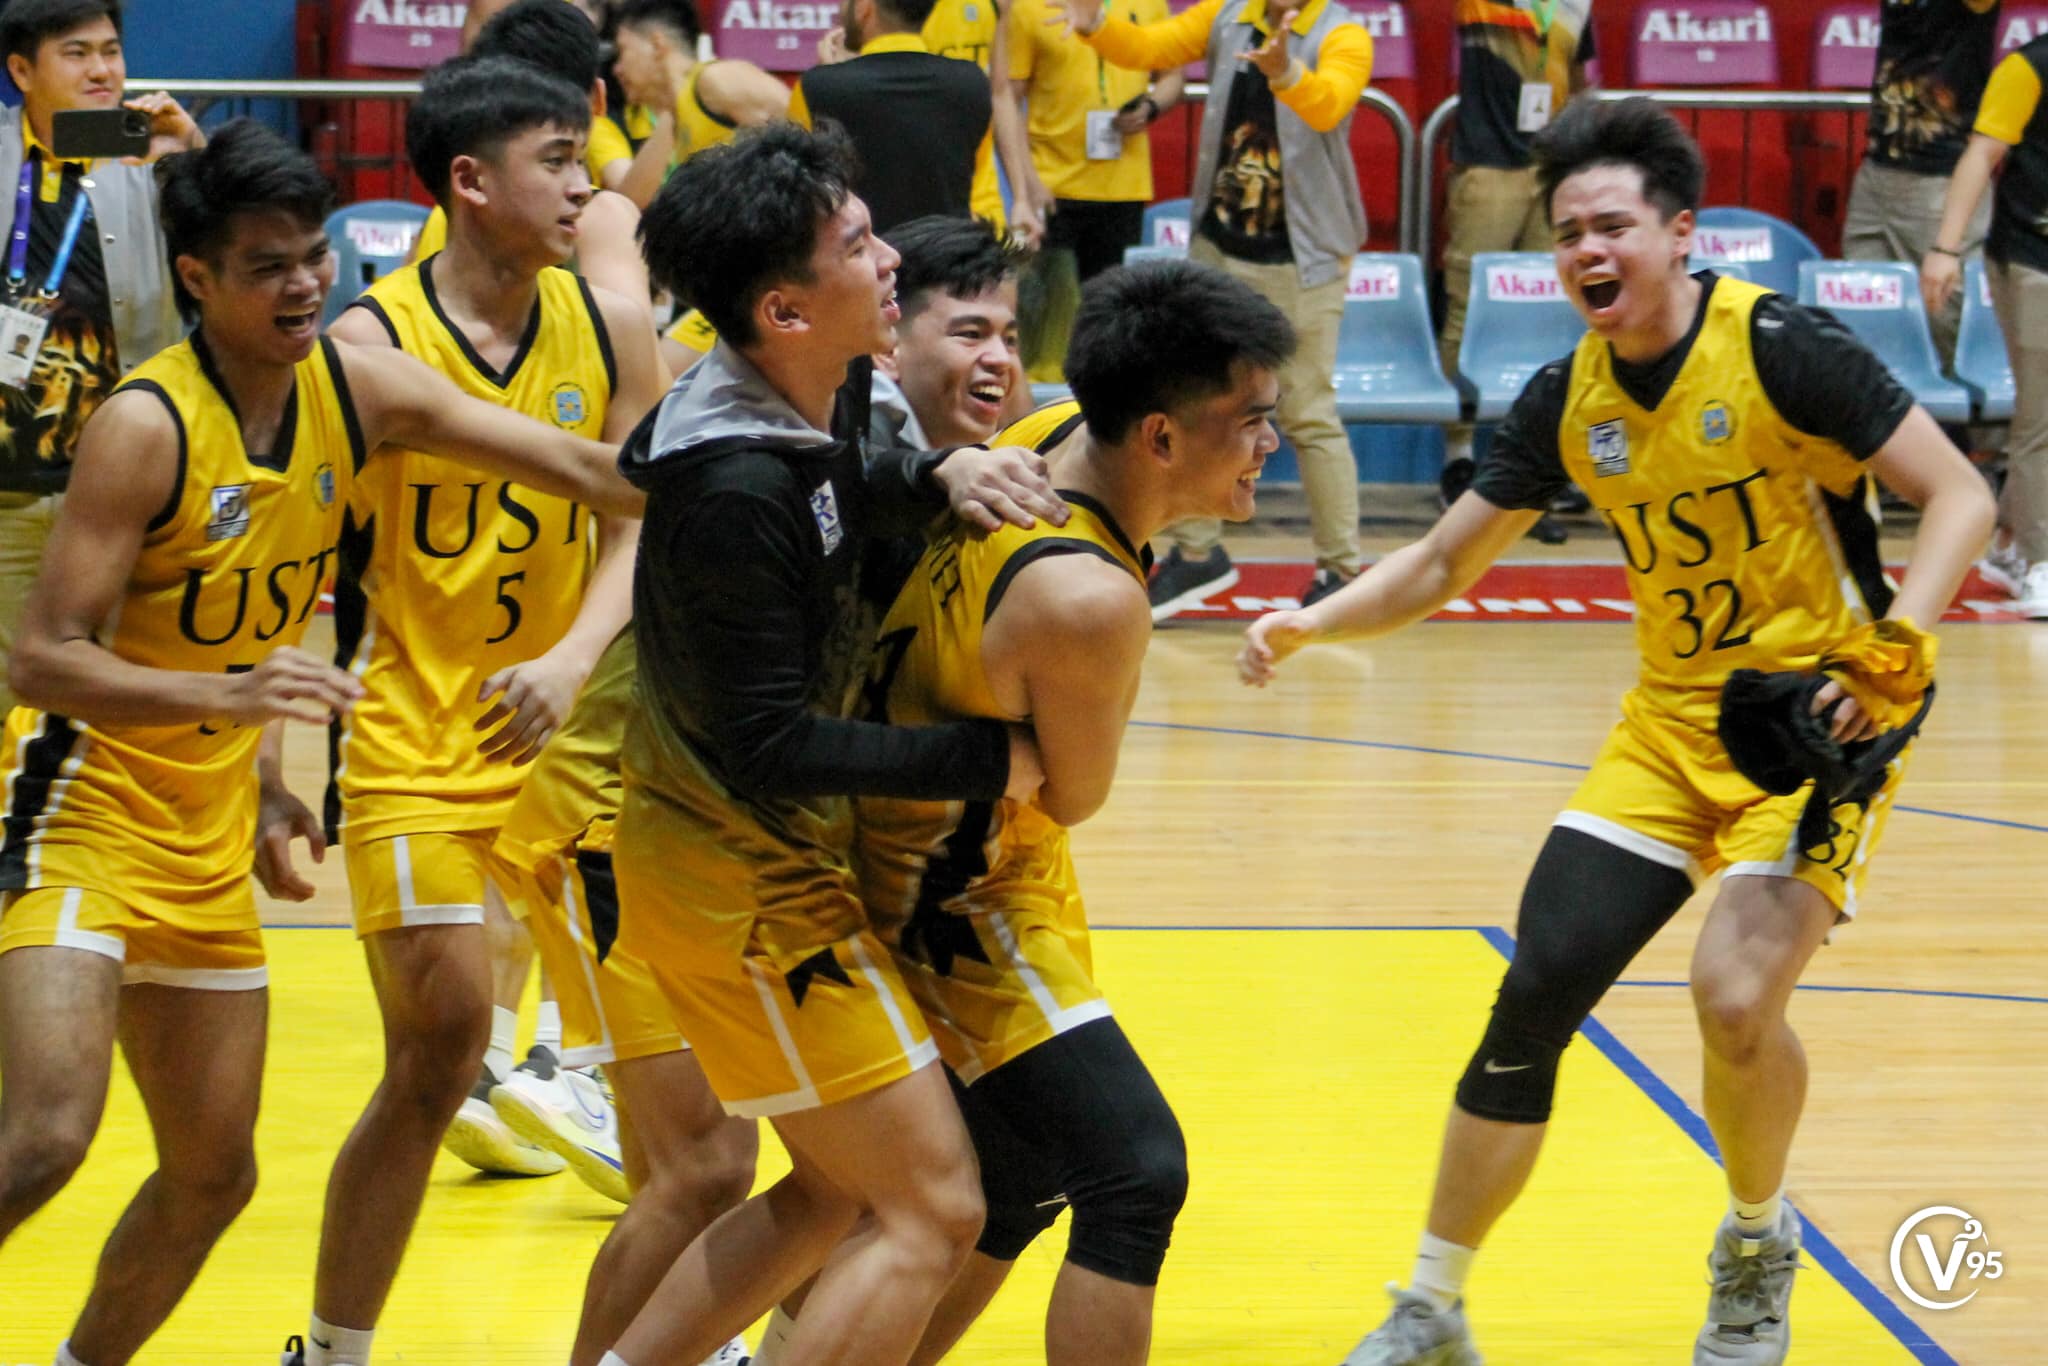 Llemit scores gamewinner as Tiger Cubs escape DLSZ in mustwin VSports